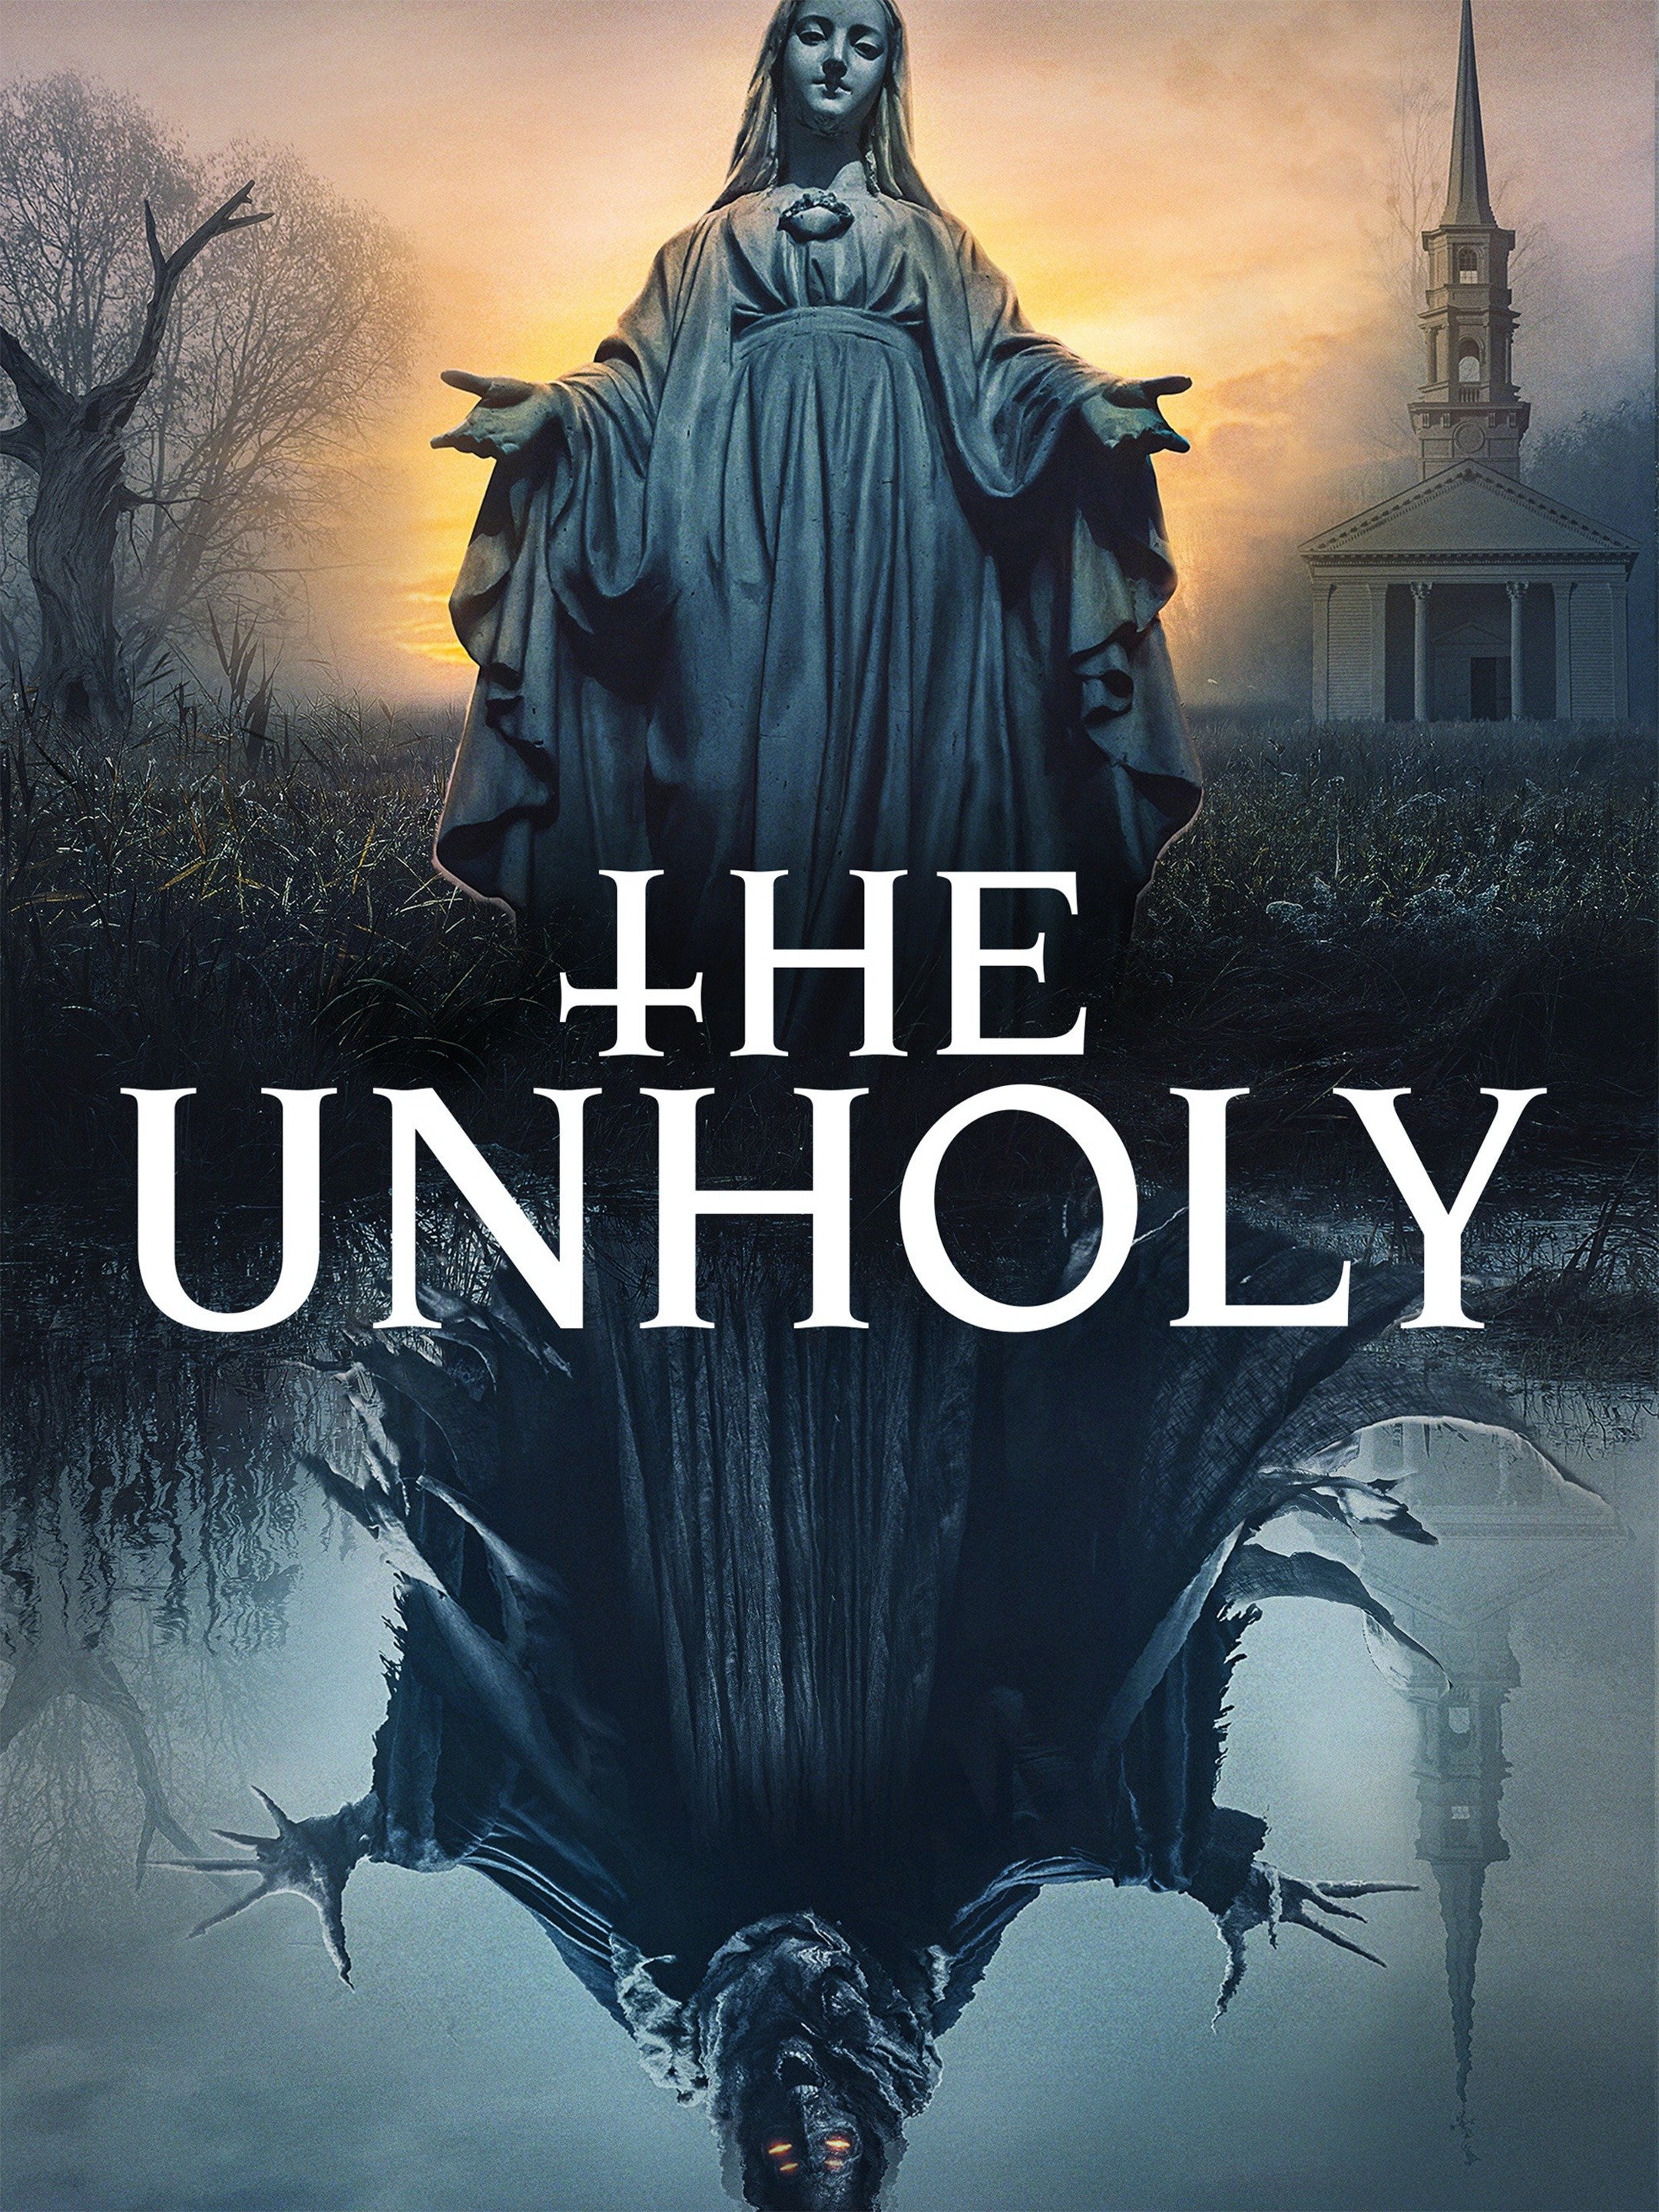 The Unholy Official Clip Defiled Exorcism Trailers & Videos